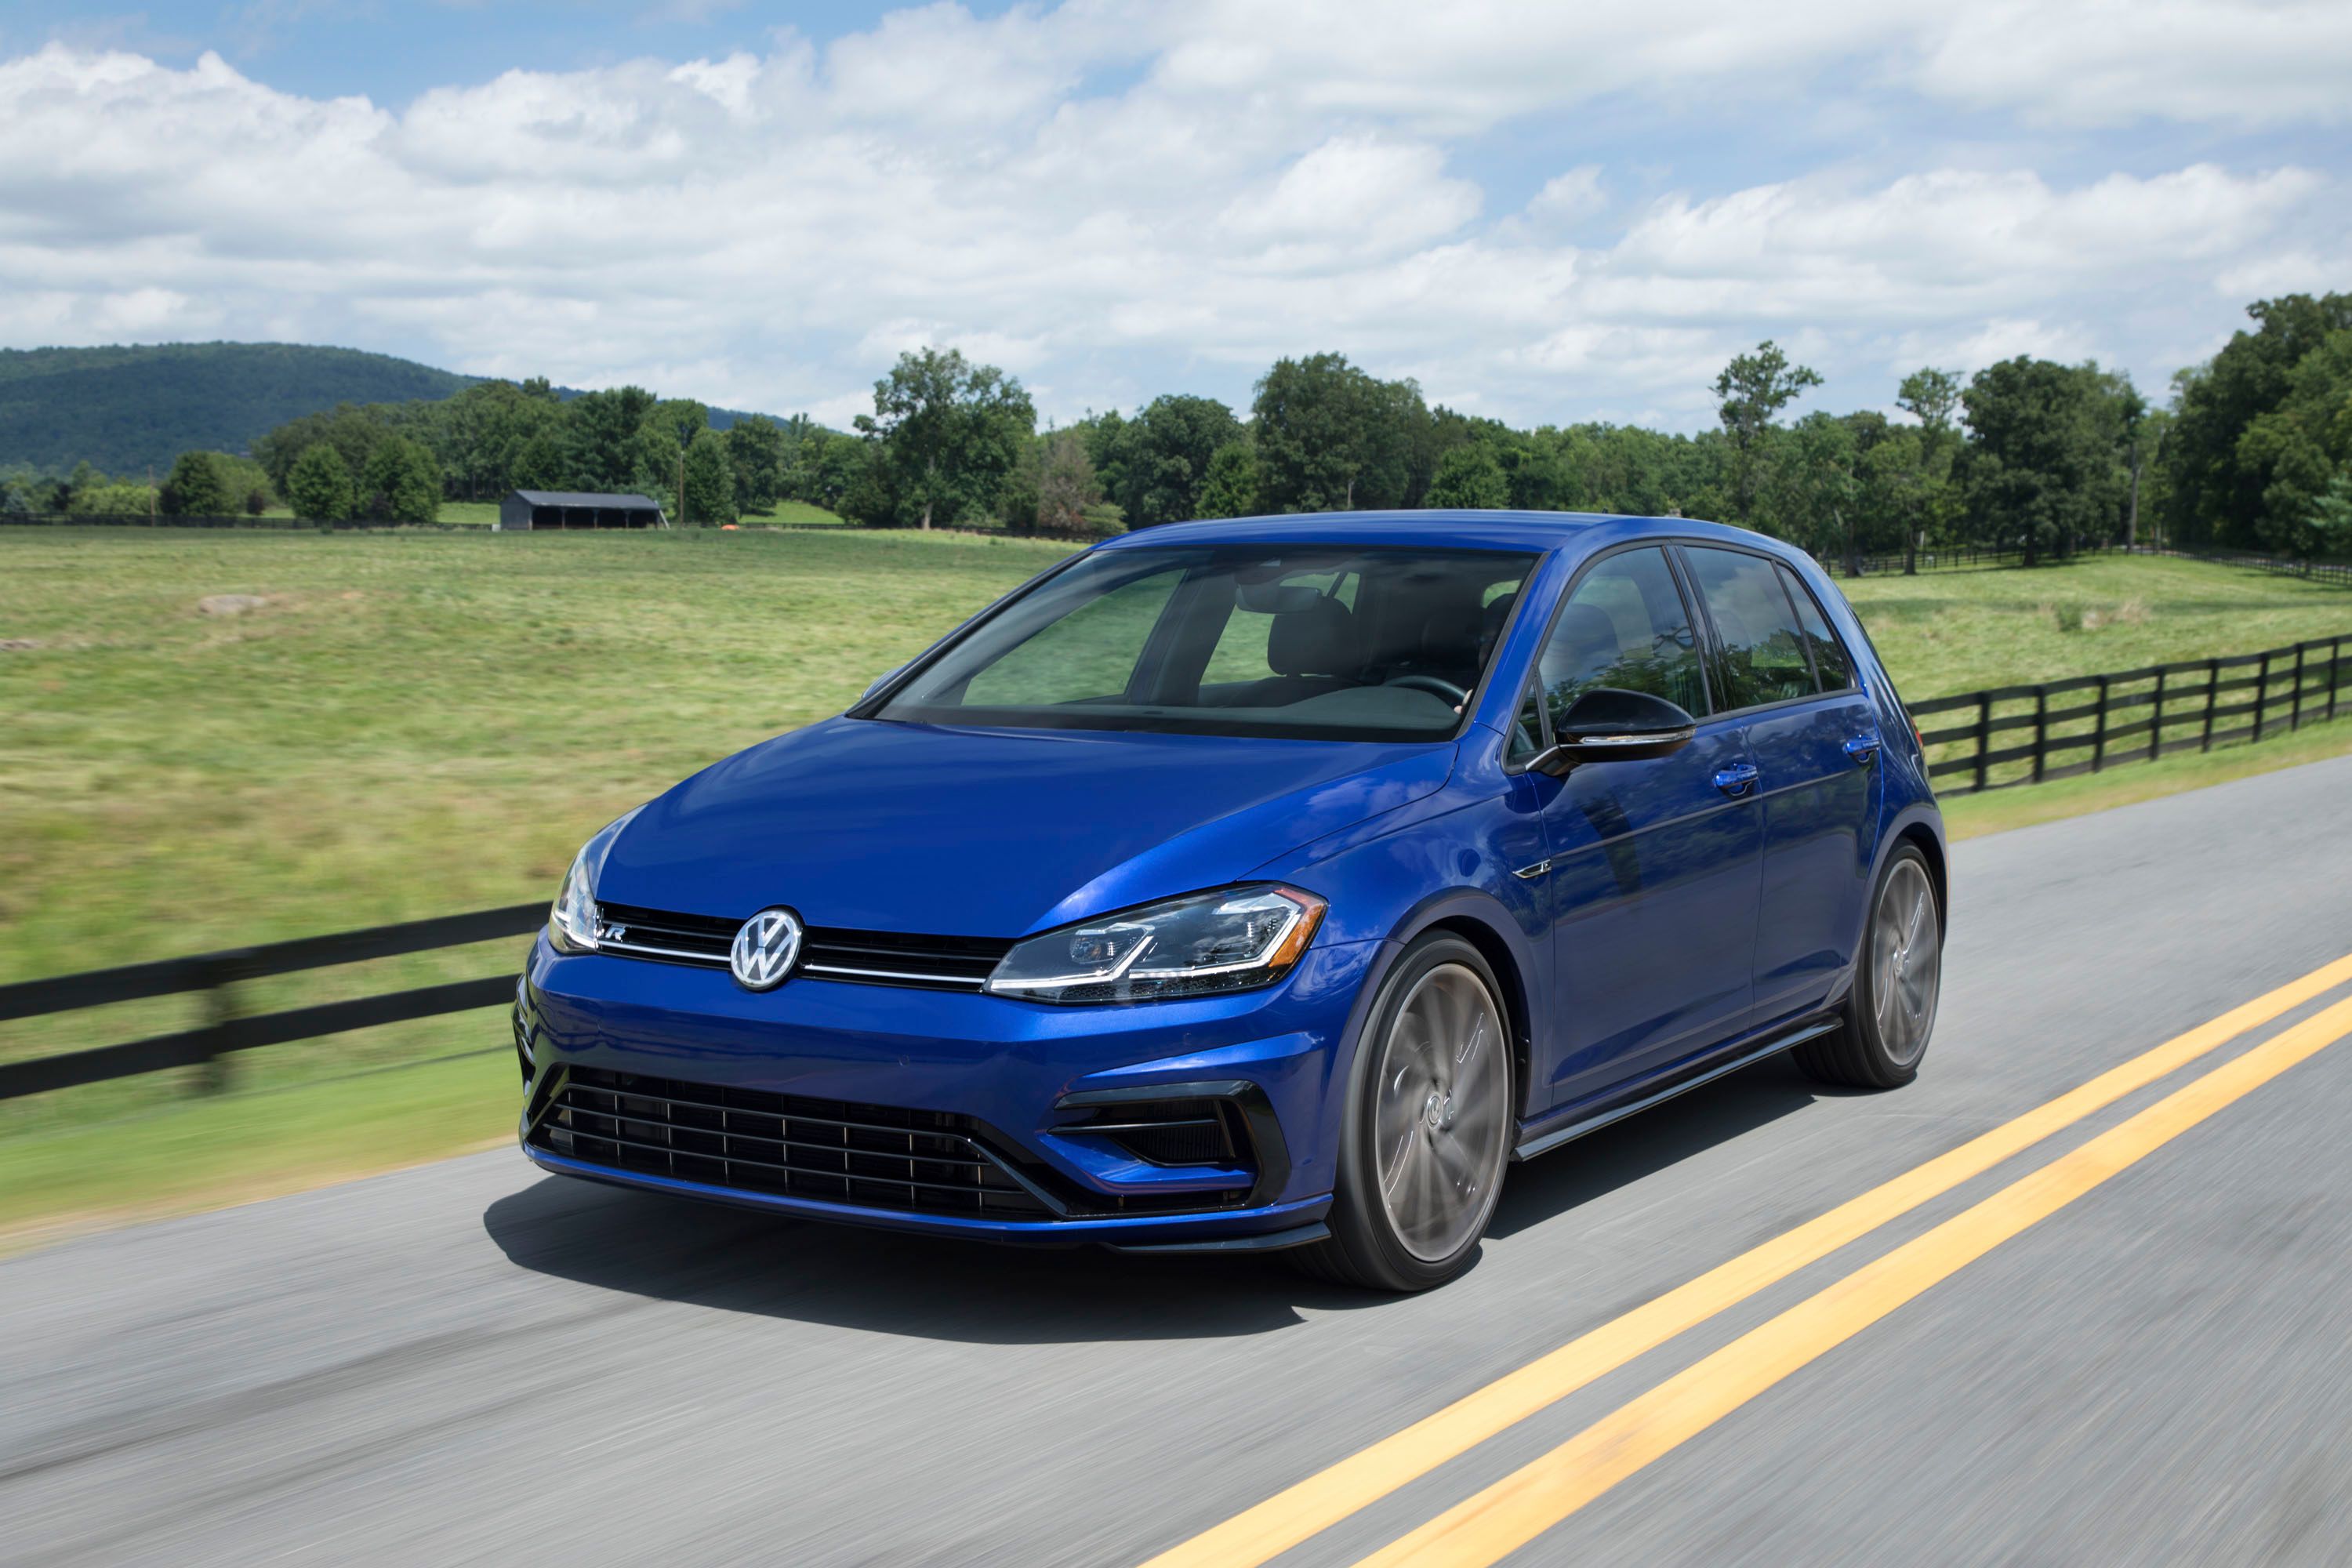 2021 The Volkswagen Golf R Has Been Cancelled but For How Long?